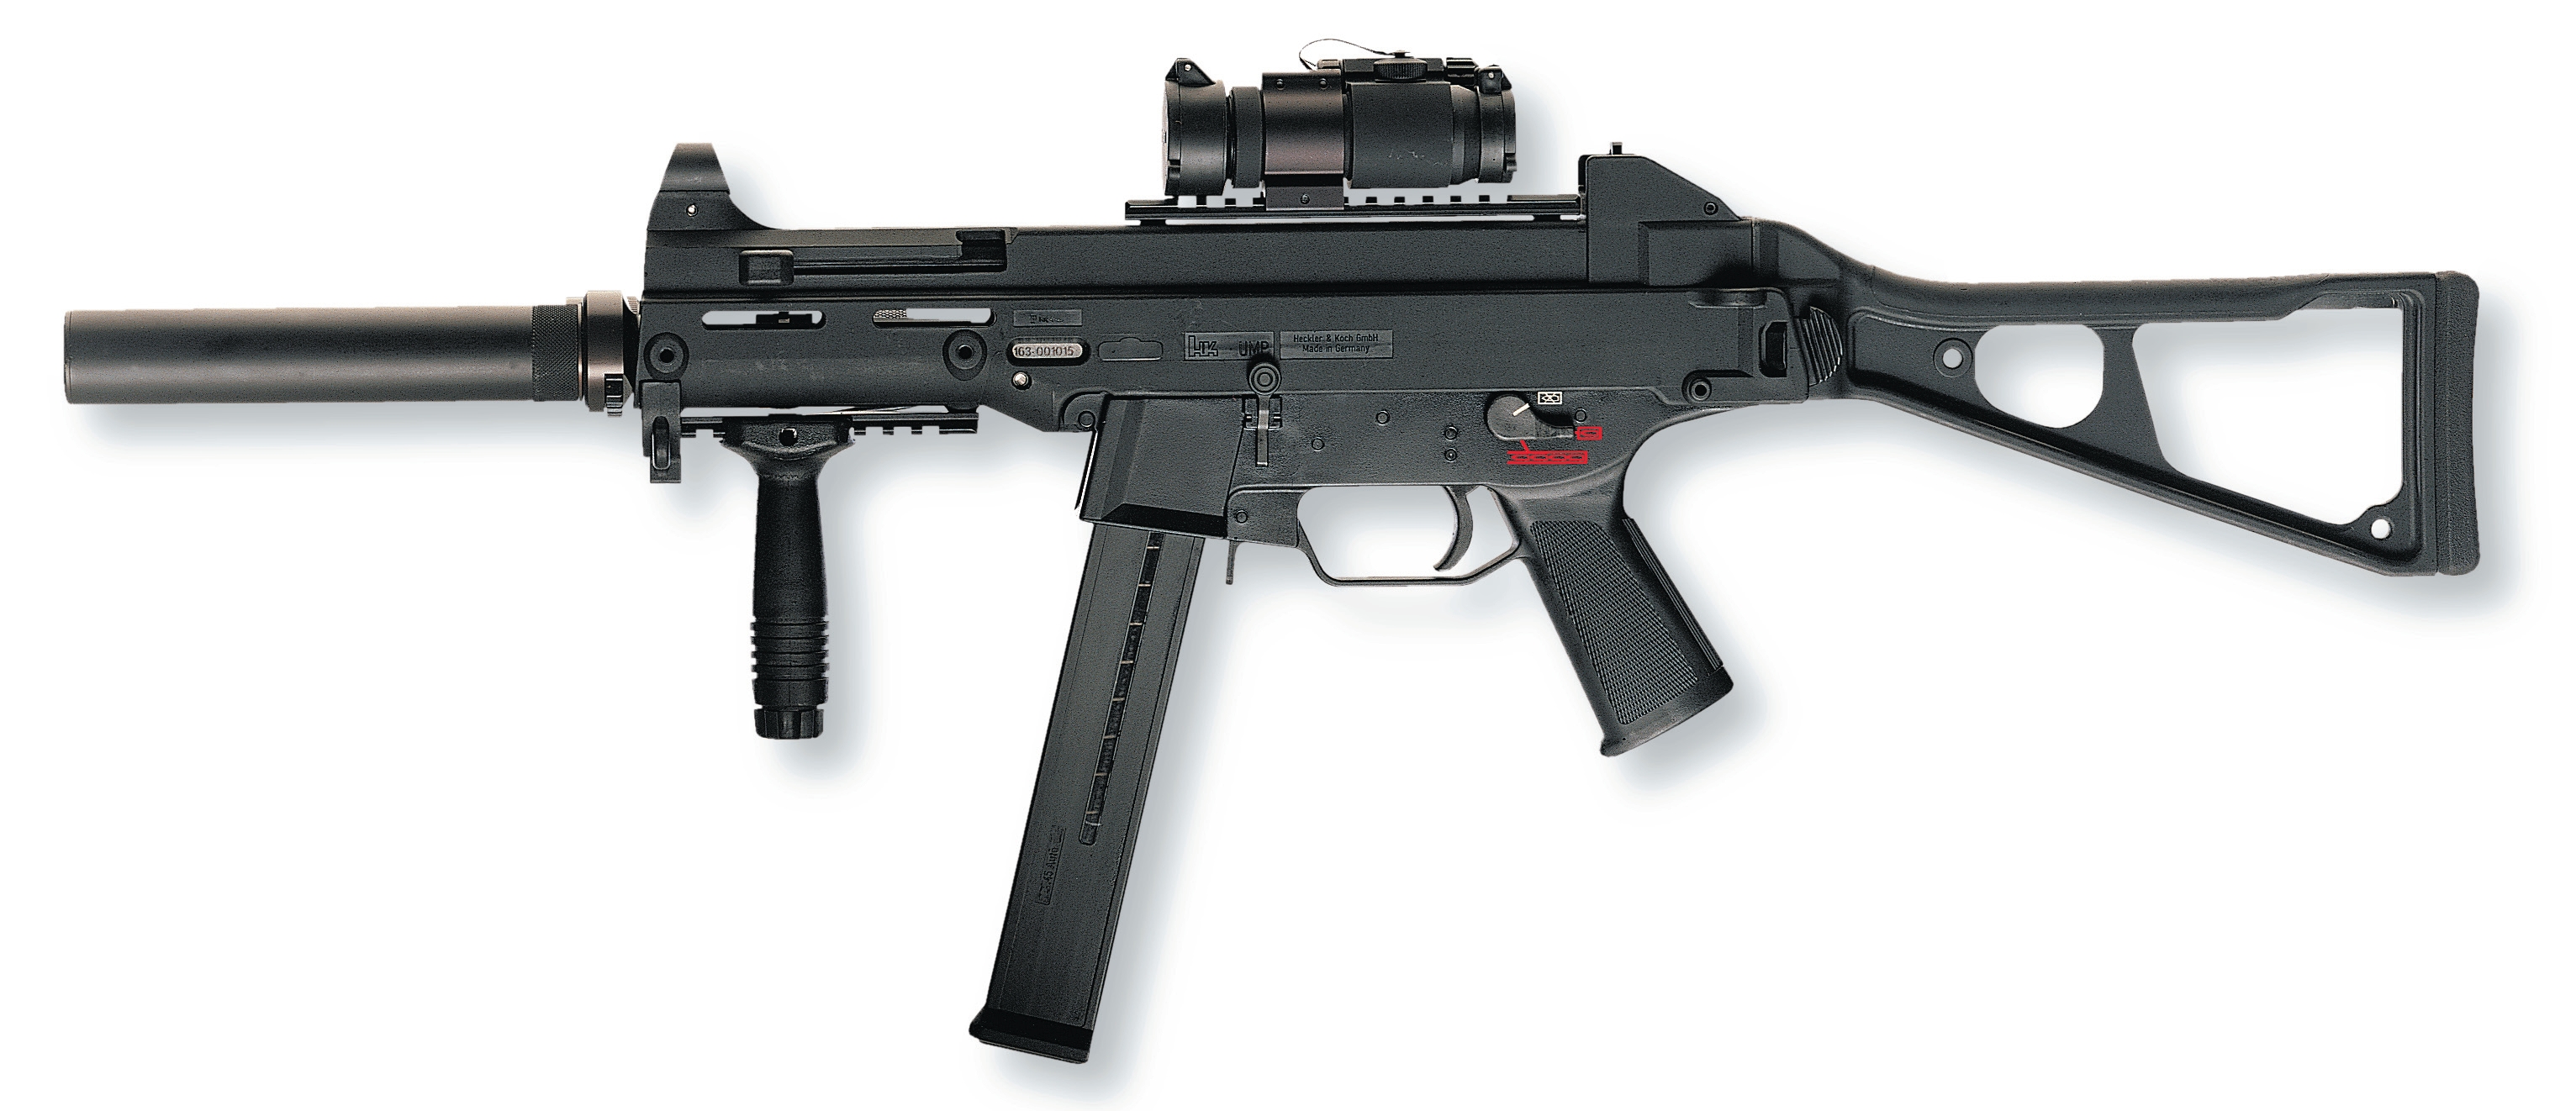 Guns Weapons Heckler And Koch 45acp Ump Smg Aimpoint